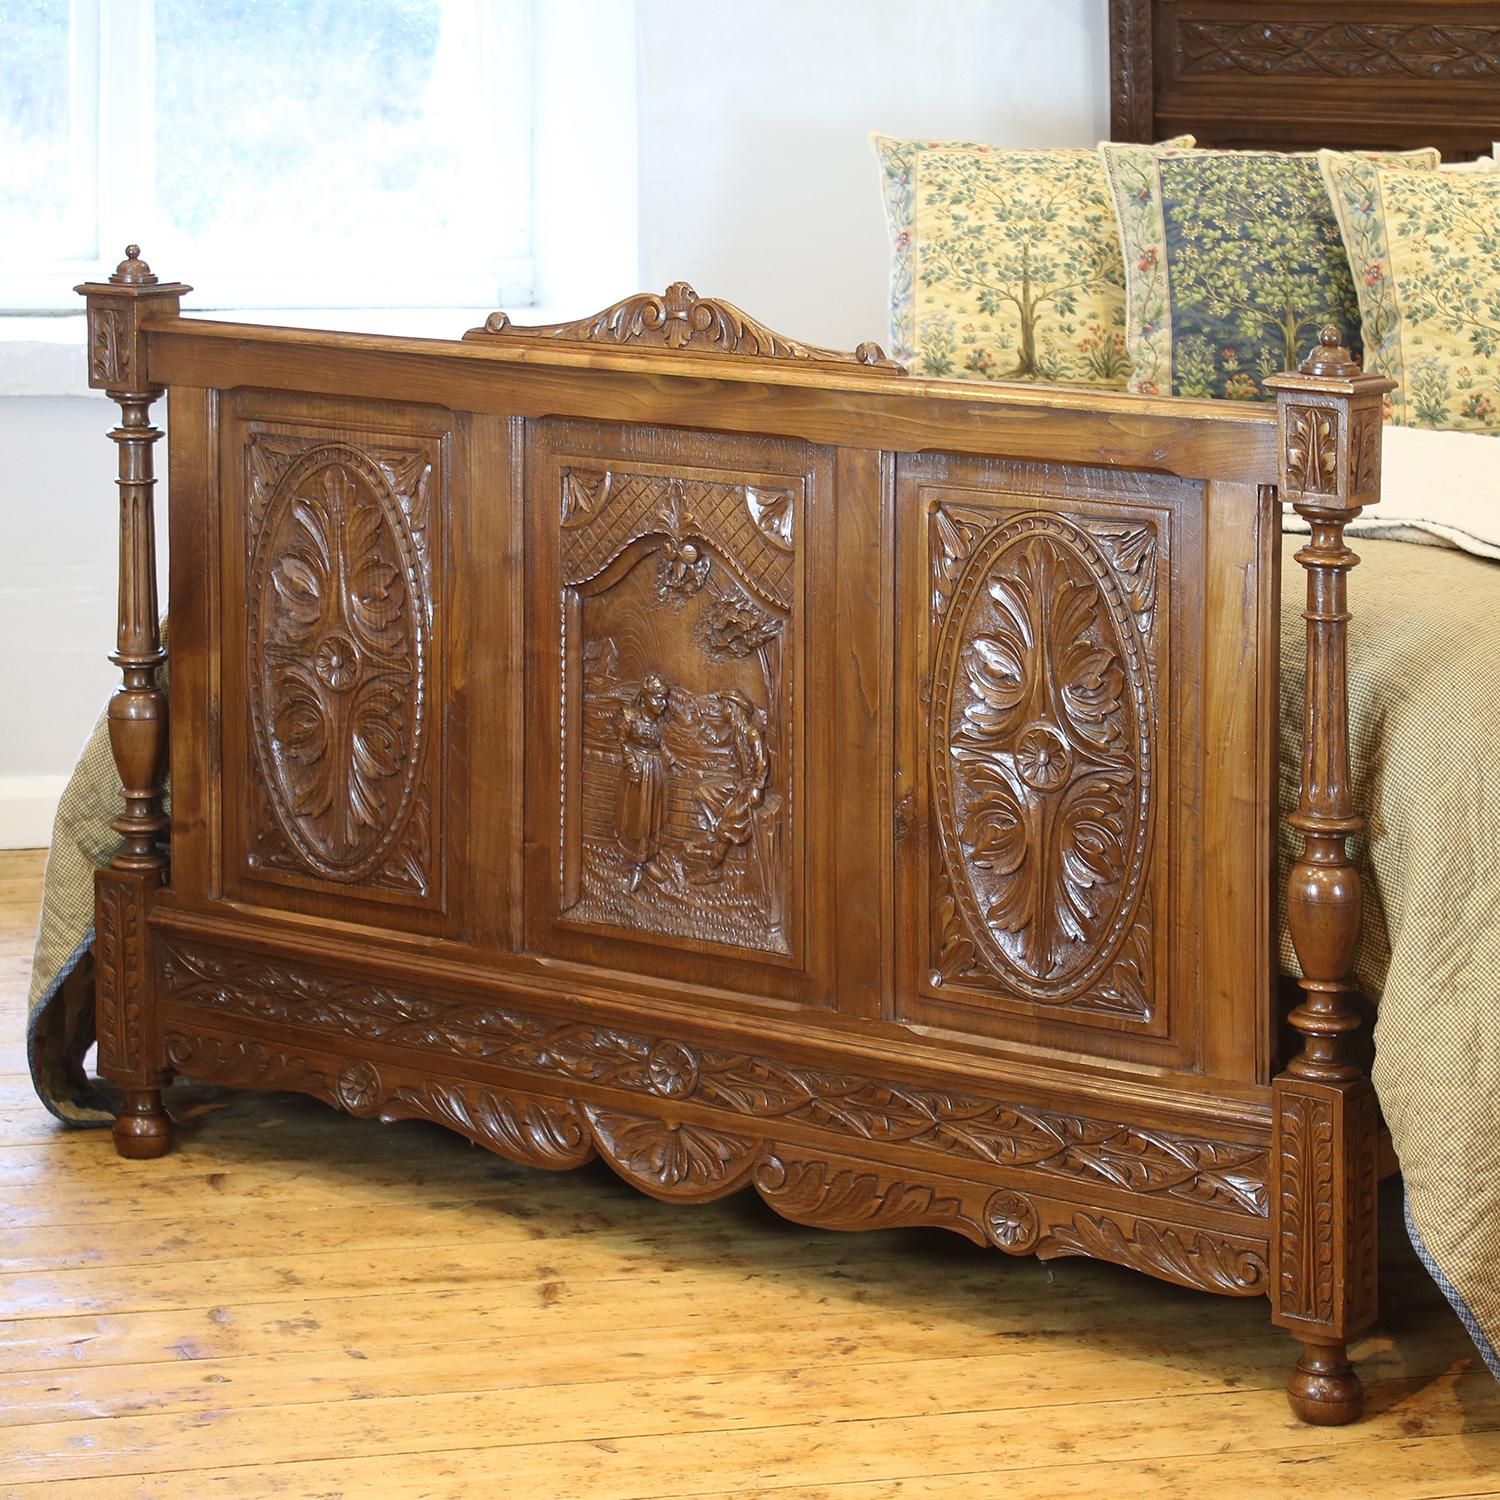 A fine Breton bed with ornate carving on pediment and foot panel.

This bed accepts a British King size or American Queen size, 5ft wide (60 inches or 150cm) base and mattress set.

The price is for the bed and a firm bed base to support a